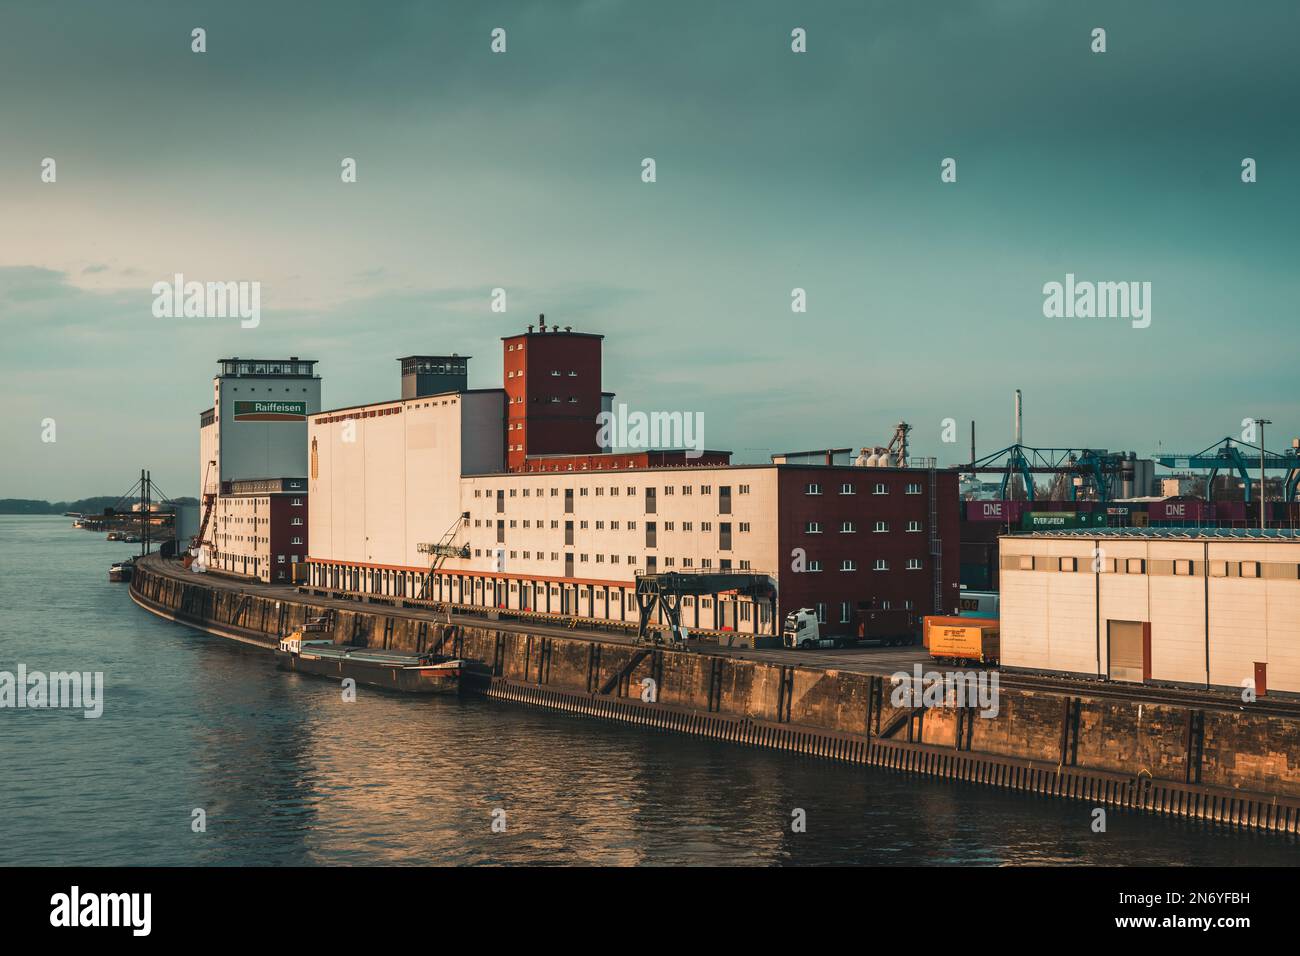 Mannheim, Germany - 26.03.2021: Warehouses and office buildings at the inland port of Mannheim on the Rhine Stock Photo